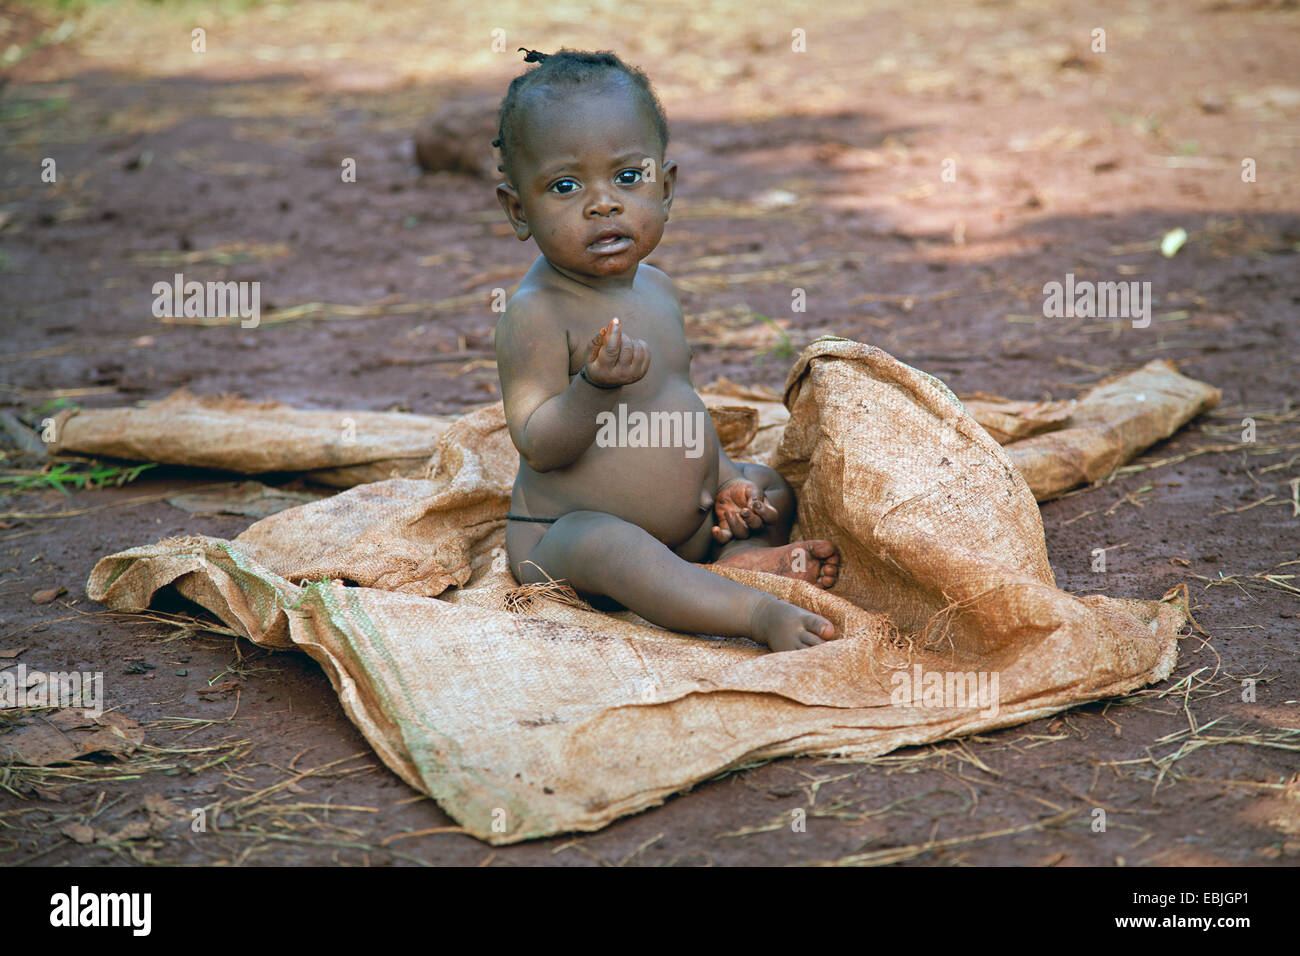 Female young child in a poor area sitting on a plastic bag with a belly that is bloated by worms and malnutrition, Uganda, Jinja Stock Photo